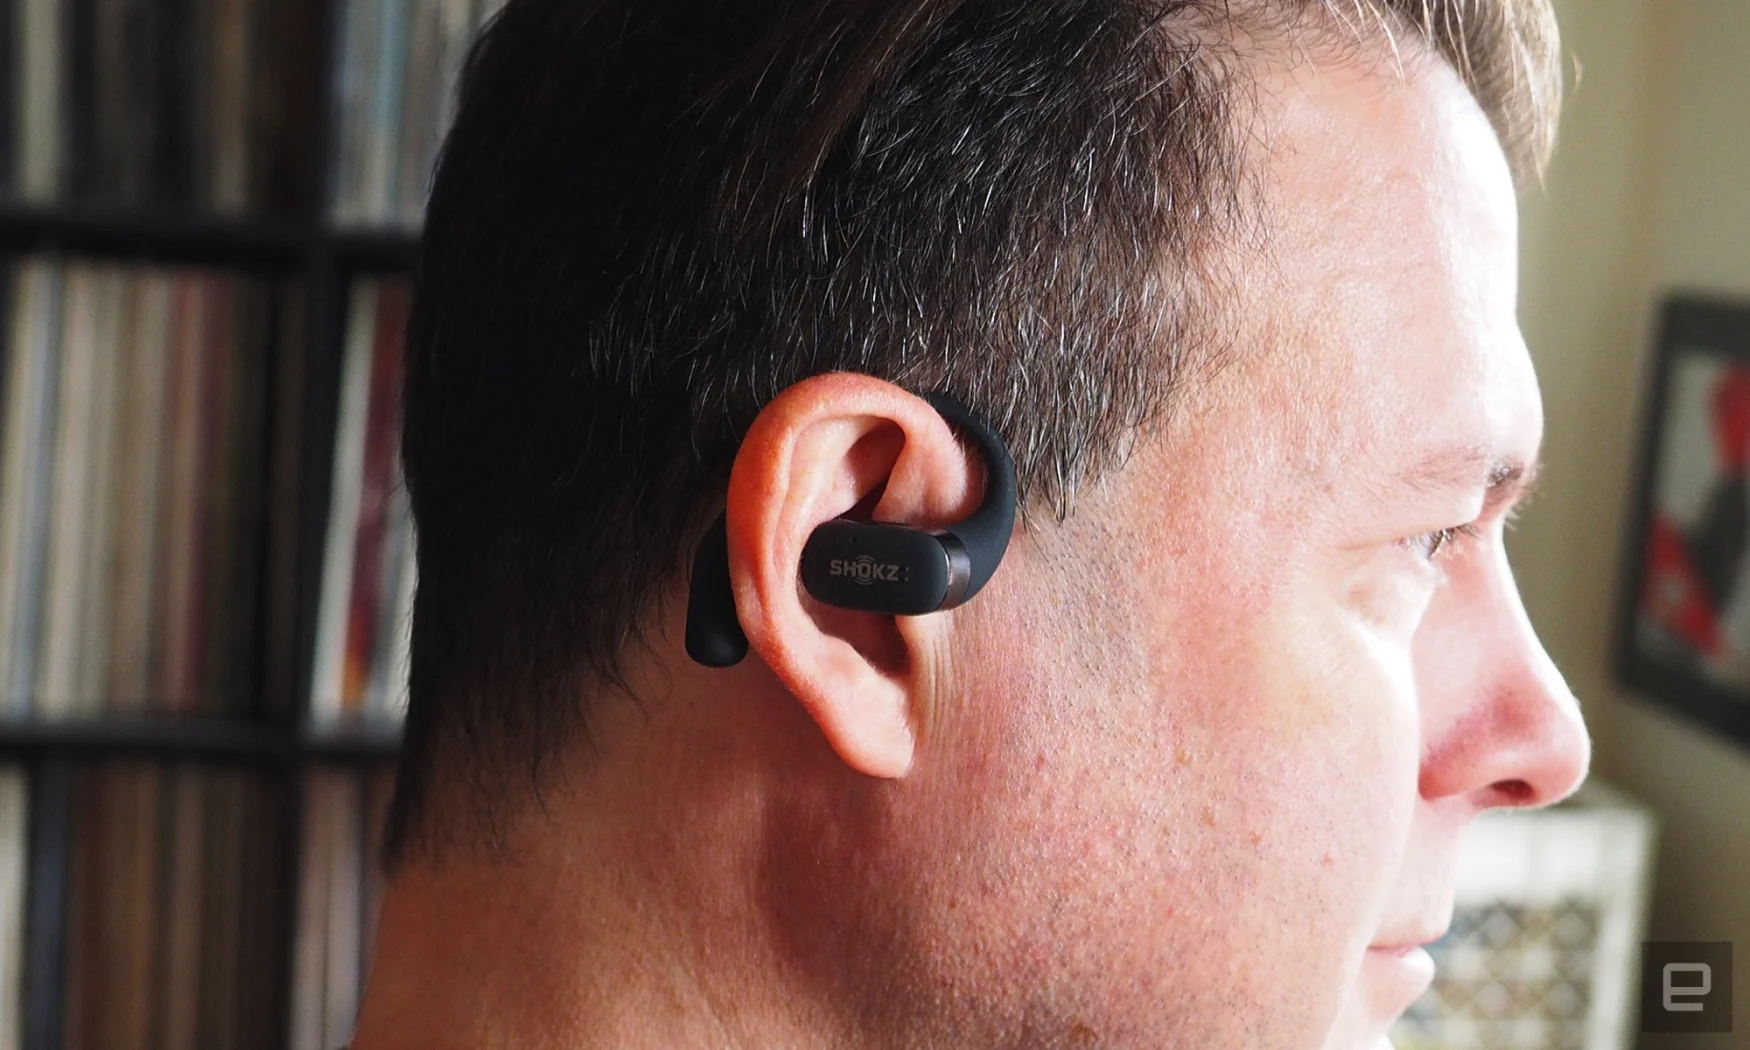 Close-up images of the Shokz OpenFit open-ear buds in grey being worn by someone seen in profile.